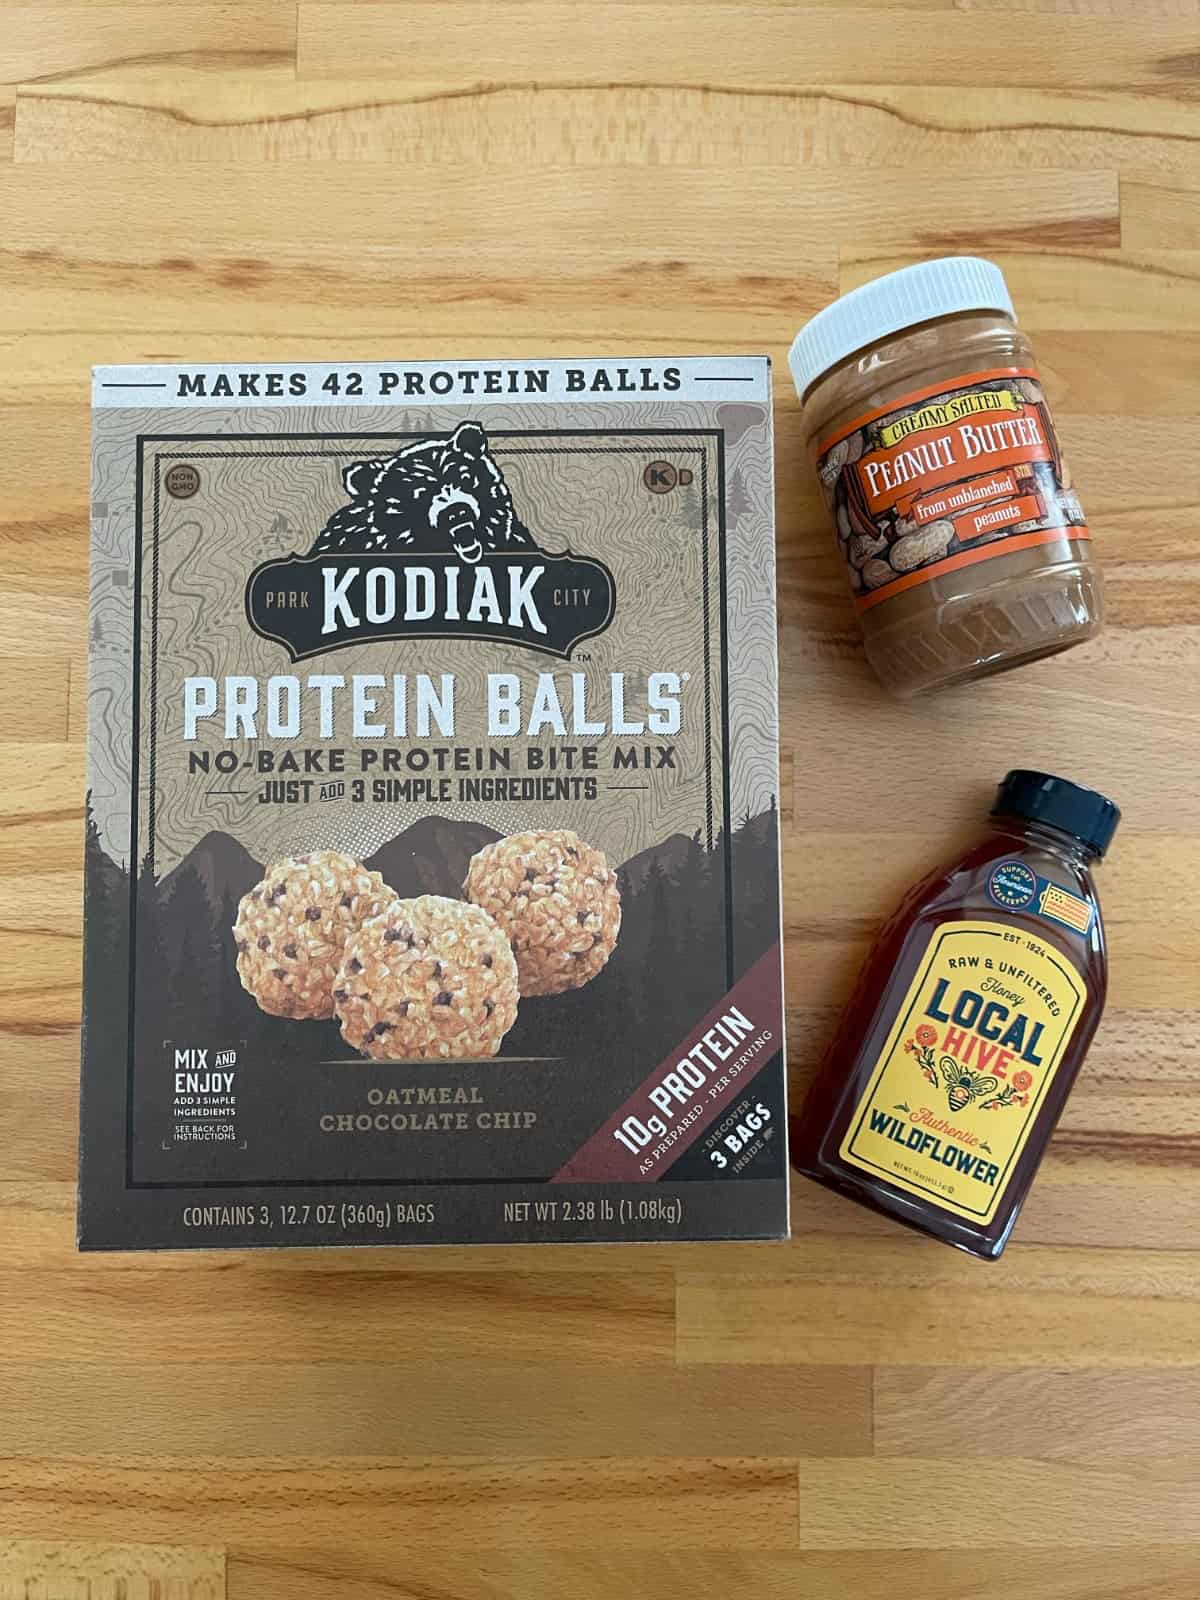 Box of Kodiak no-bake protein bite mix, honey and peanut butter on wooden table.